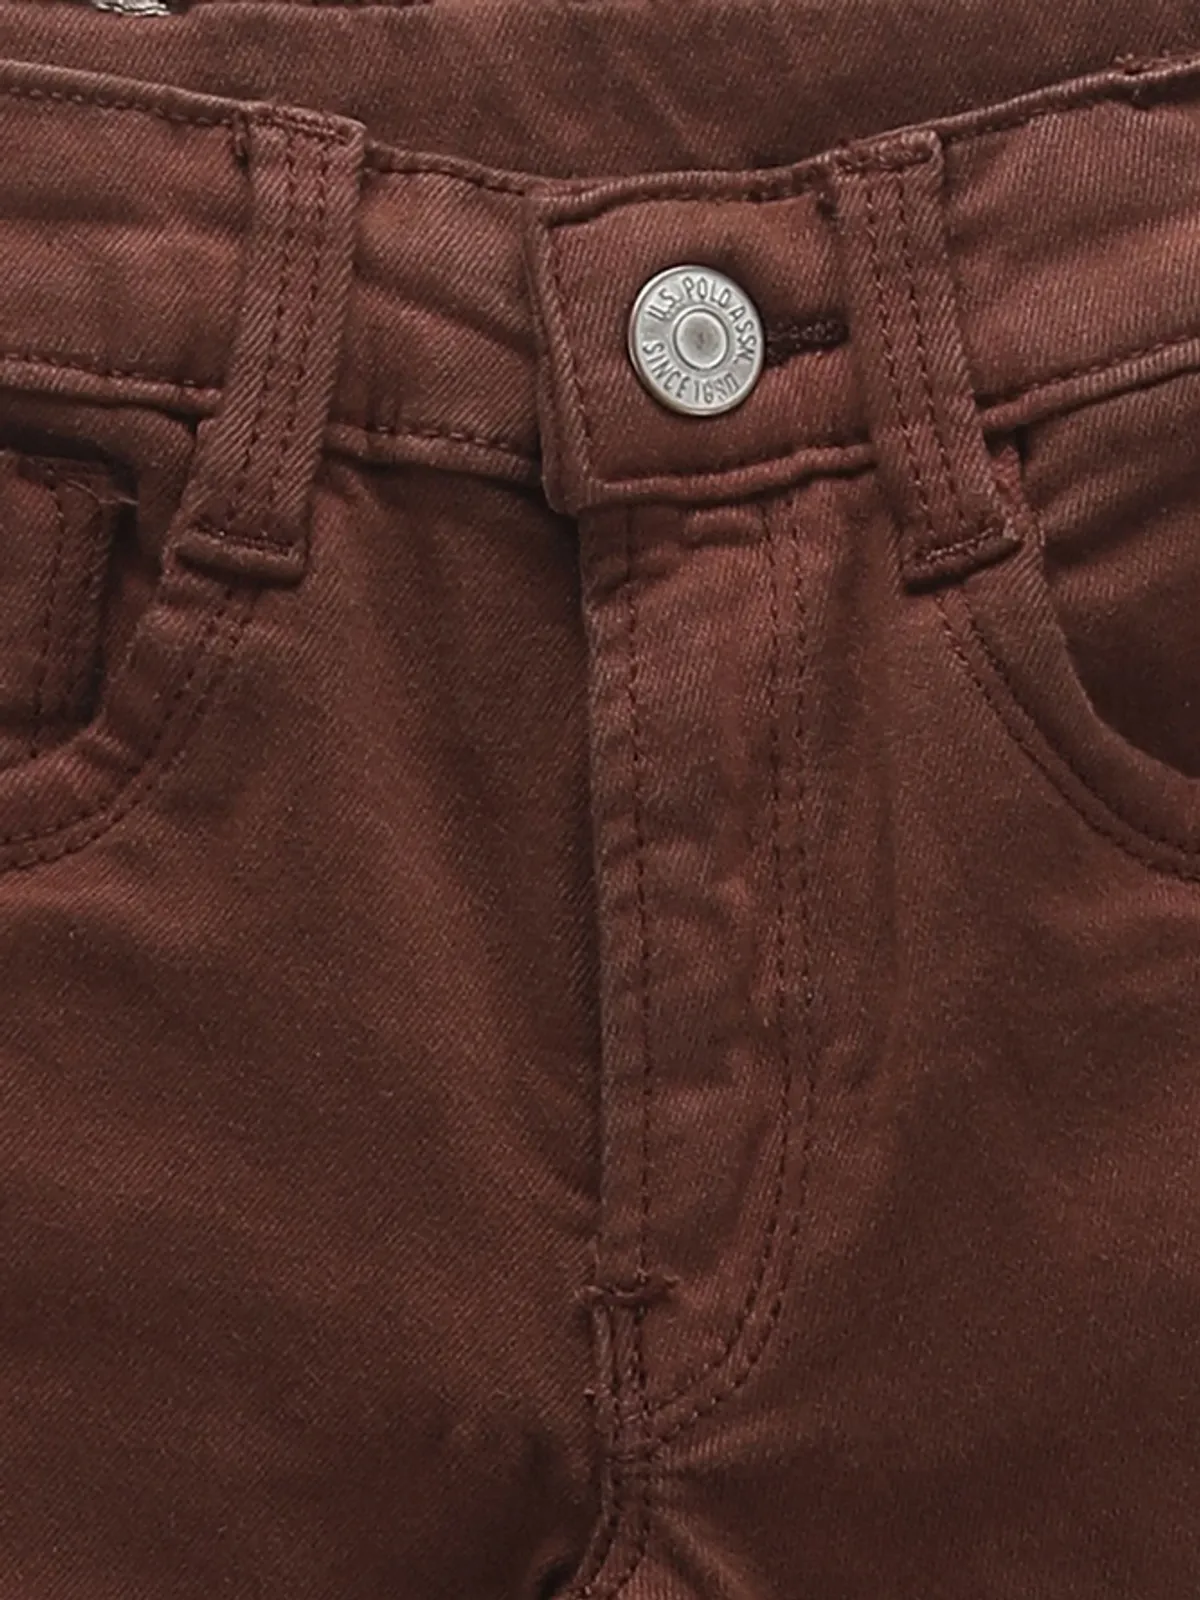 U S POLO ASSN brown solid shorts